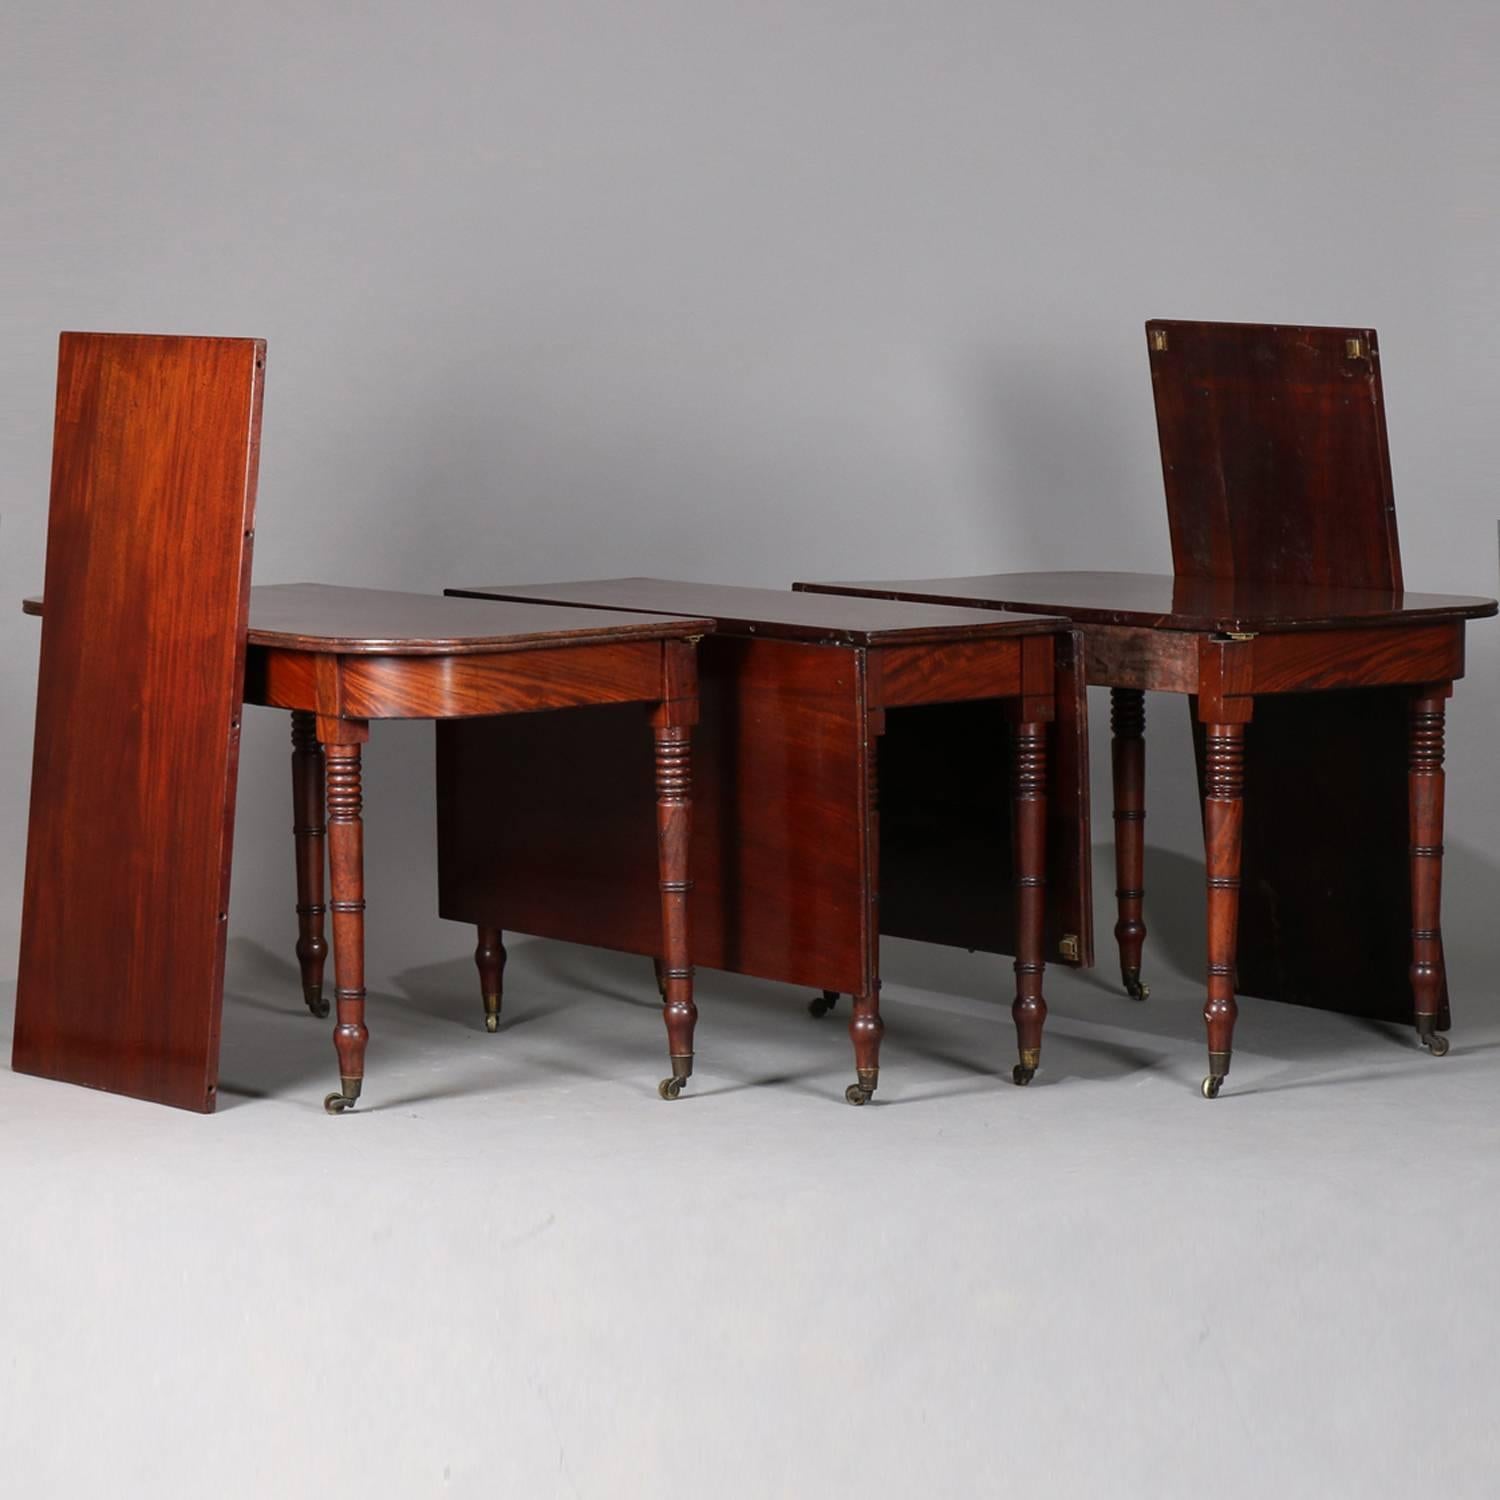 Antique Sheraton flame mahogany banquet table features top with reeded edging over skirt and seated on turned legs with castors, includes two demilune sections and a drop leaf section and has two leaves, circa 1820

Measures: 28.5